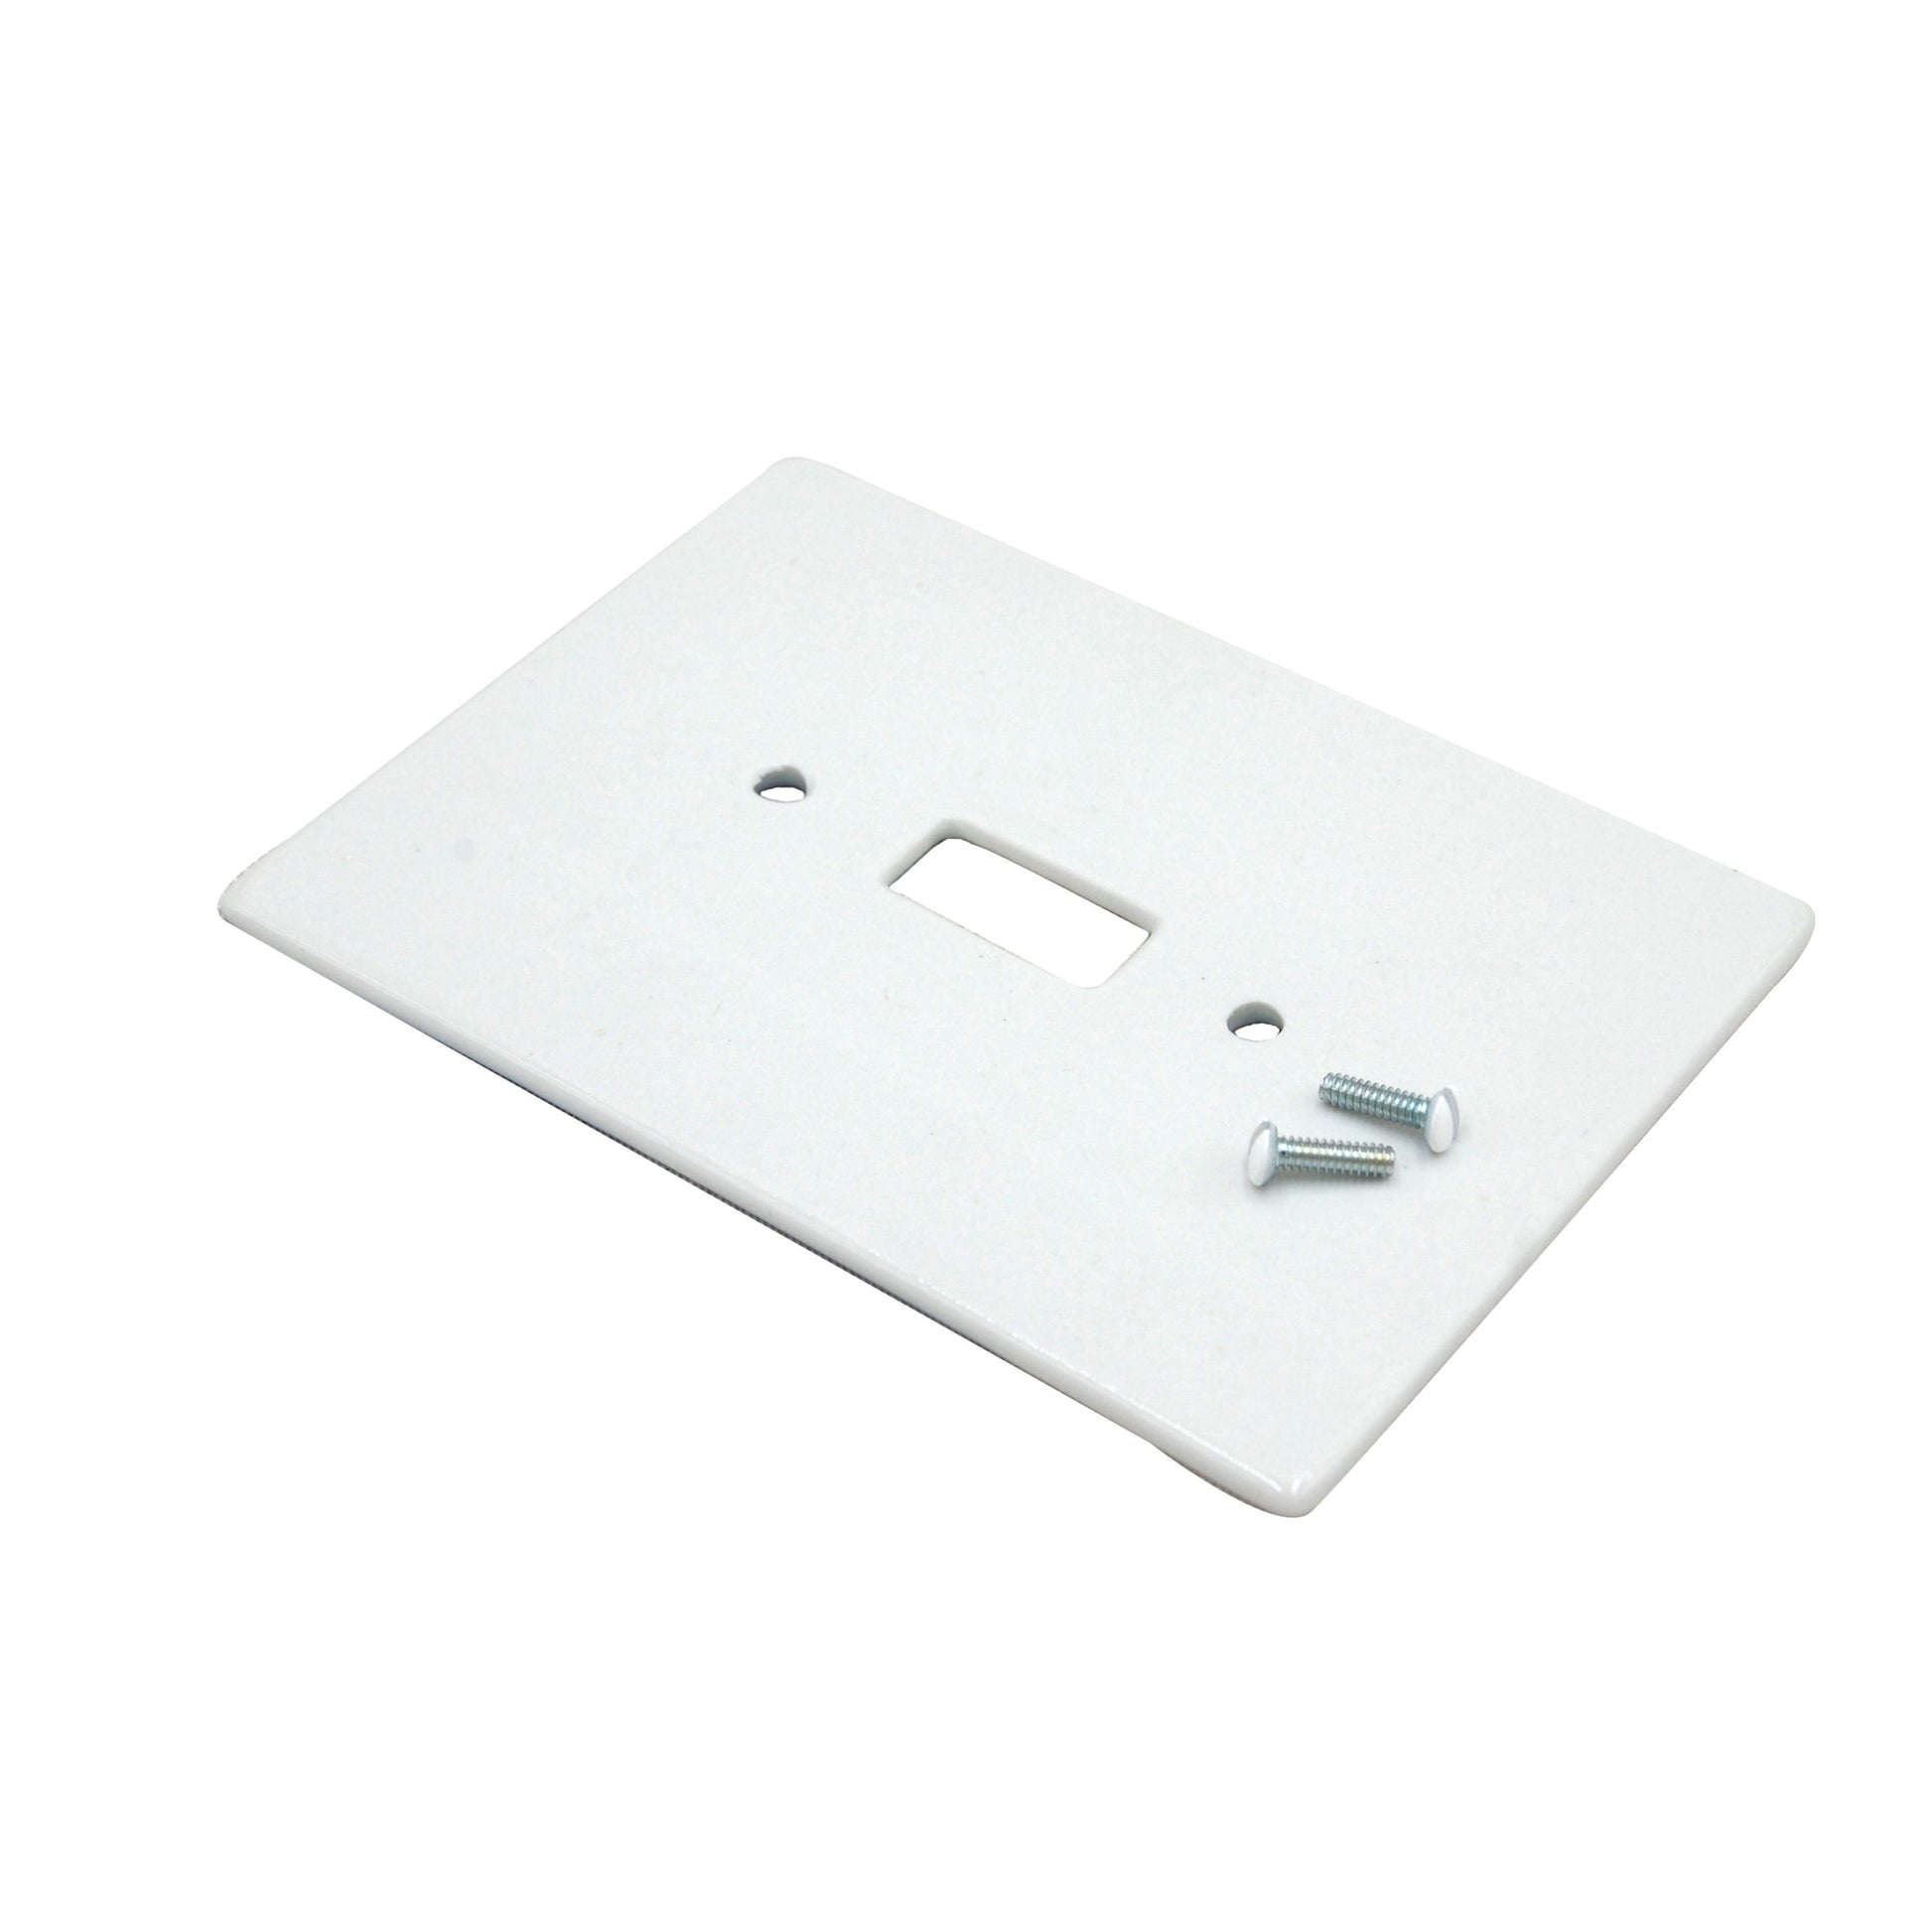 Plain single toggle switch plate with 2 white headed screws.